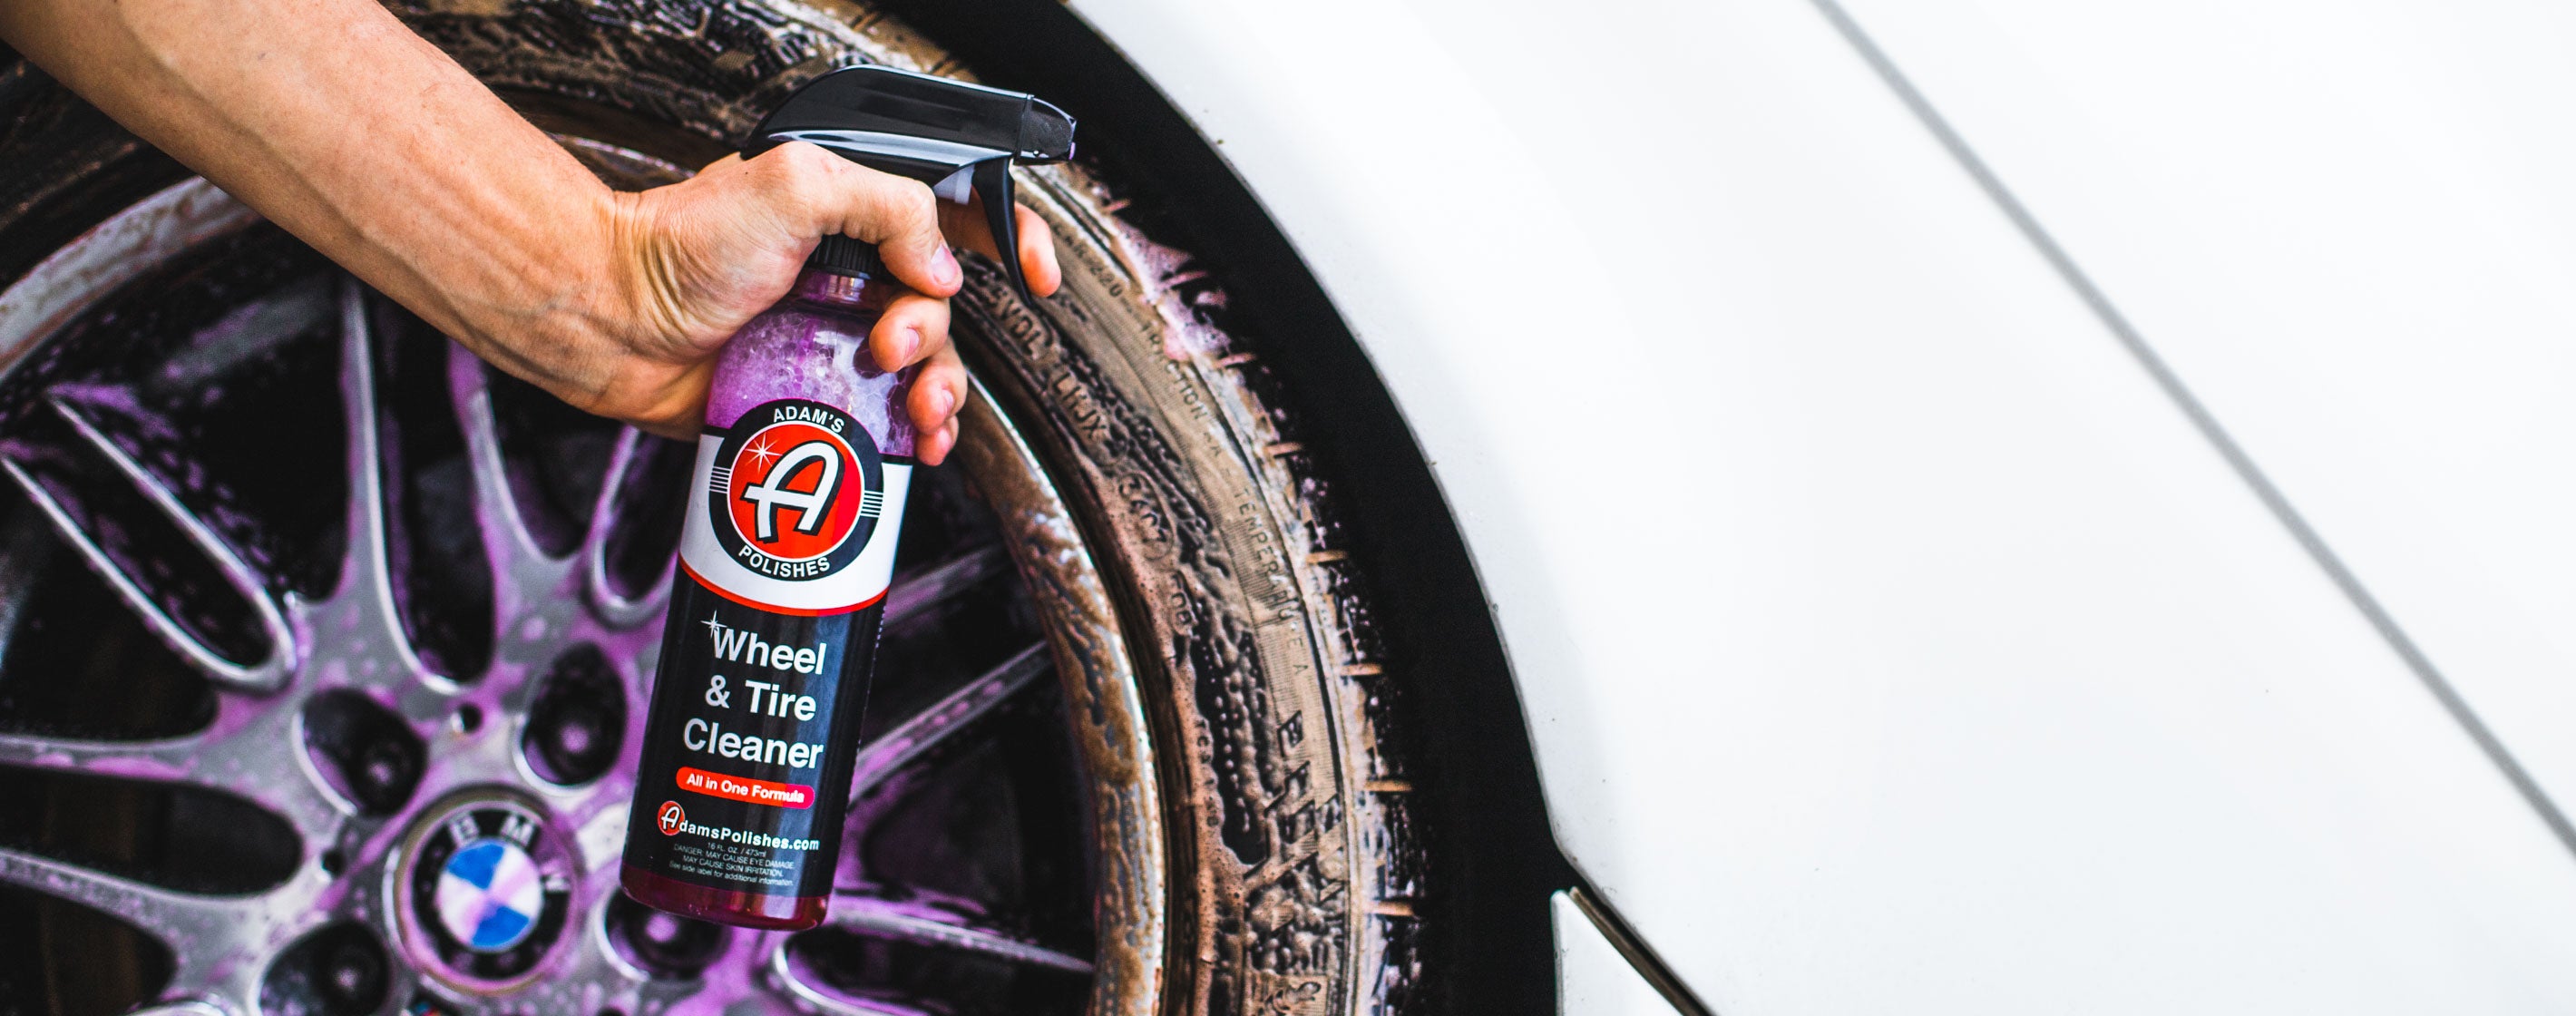 Adam's Polishes - Wheel & Tire Cleaner does all the heavy